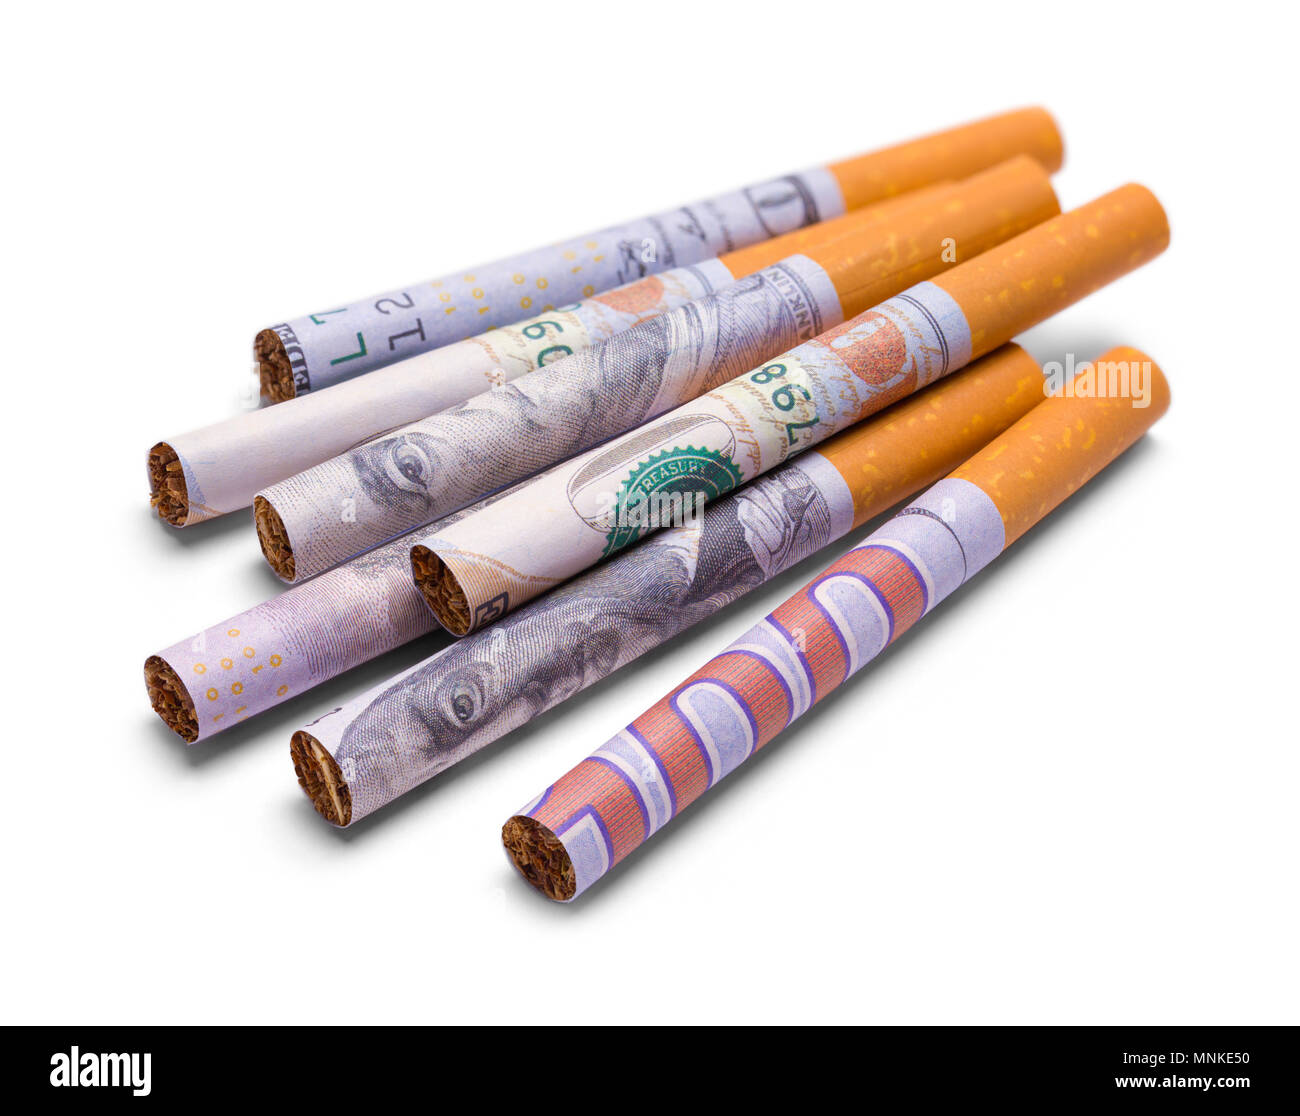 Several Hundred Dollar Money Cigarettes in a Pile Isolated on a White Background. Stock Photo